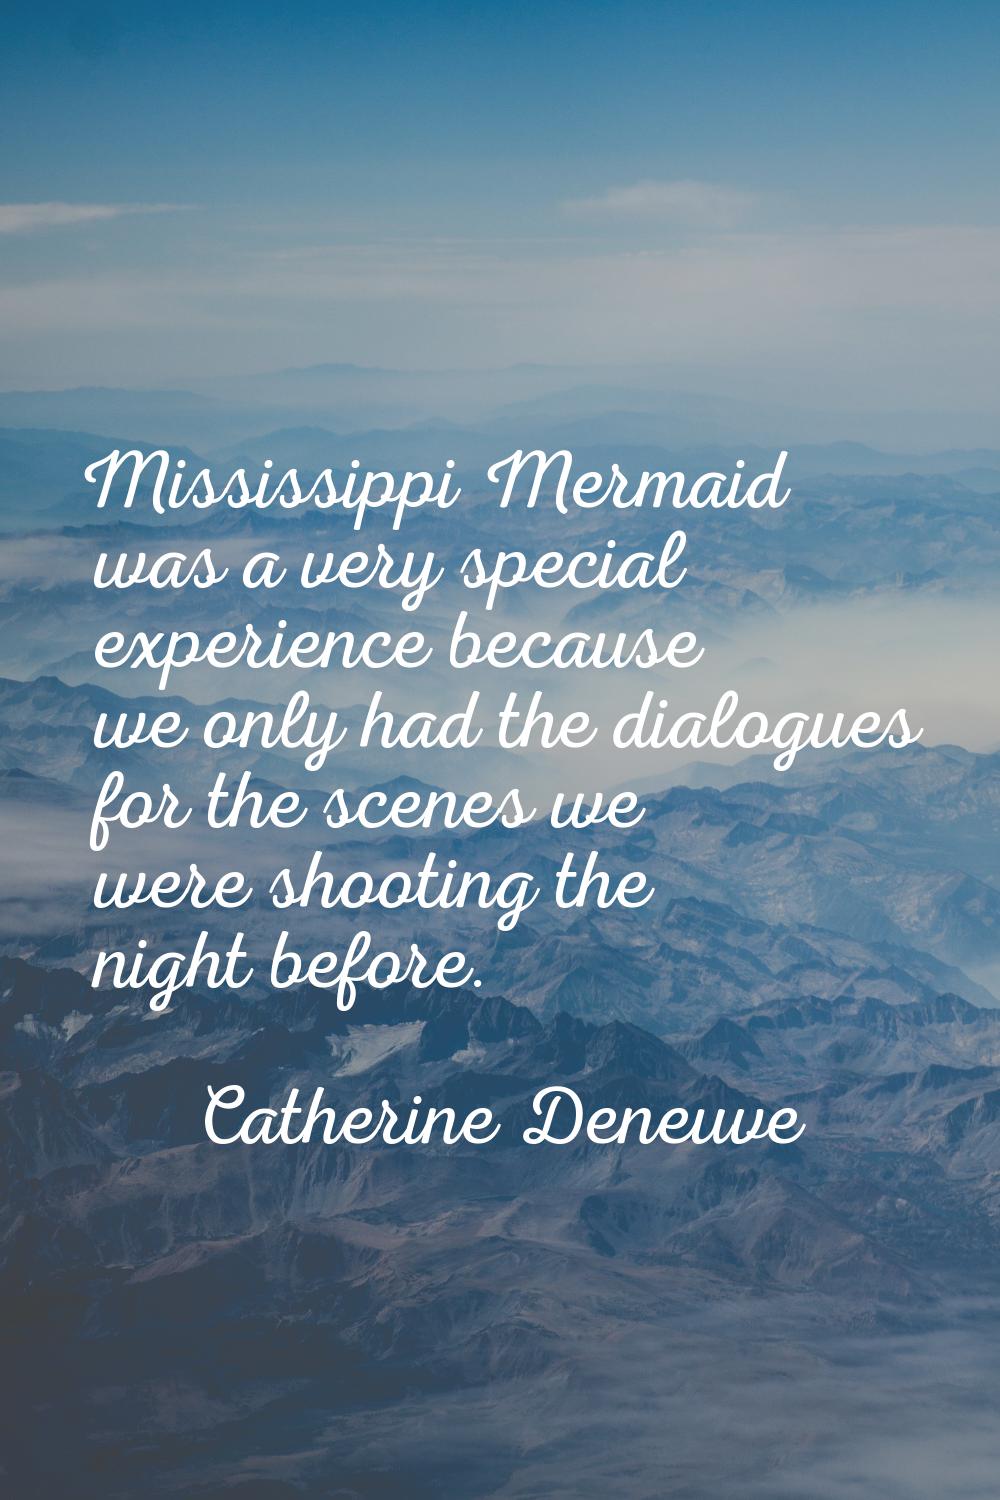 Mississippi Mermaid was a very special experience because we only had the dialogues for the scenes 